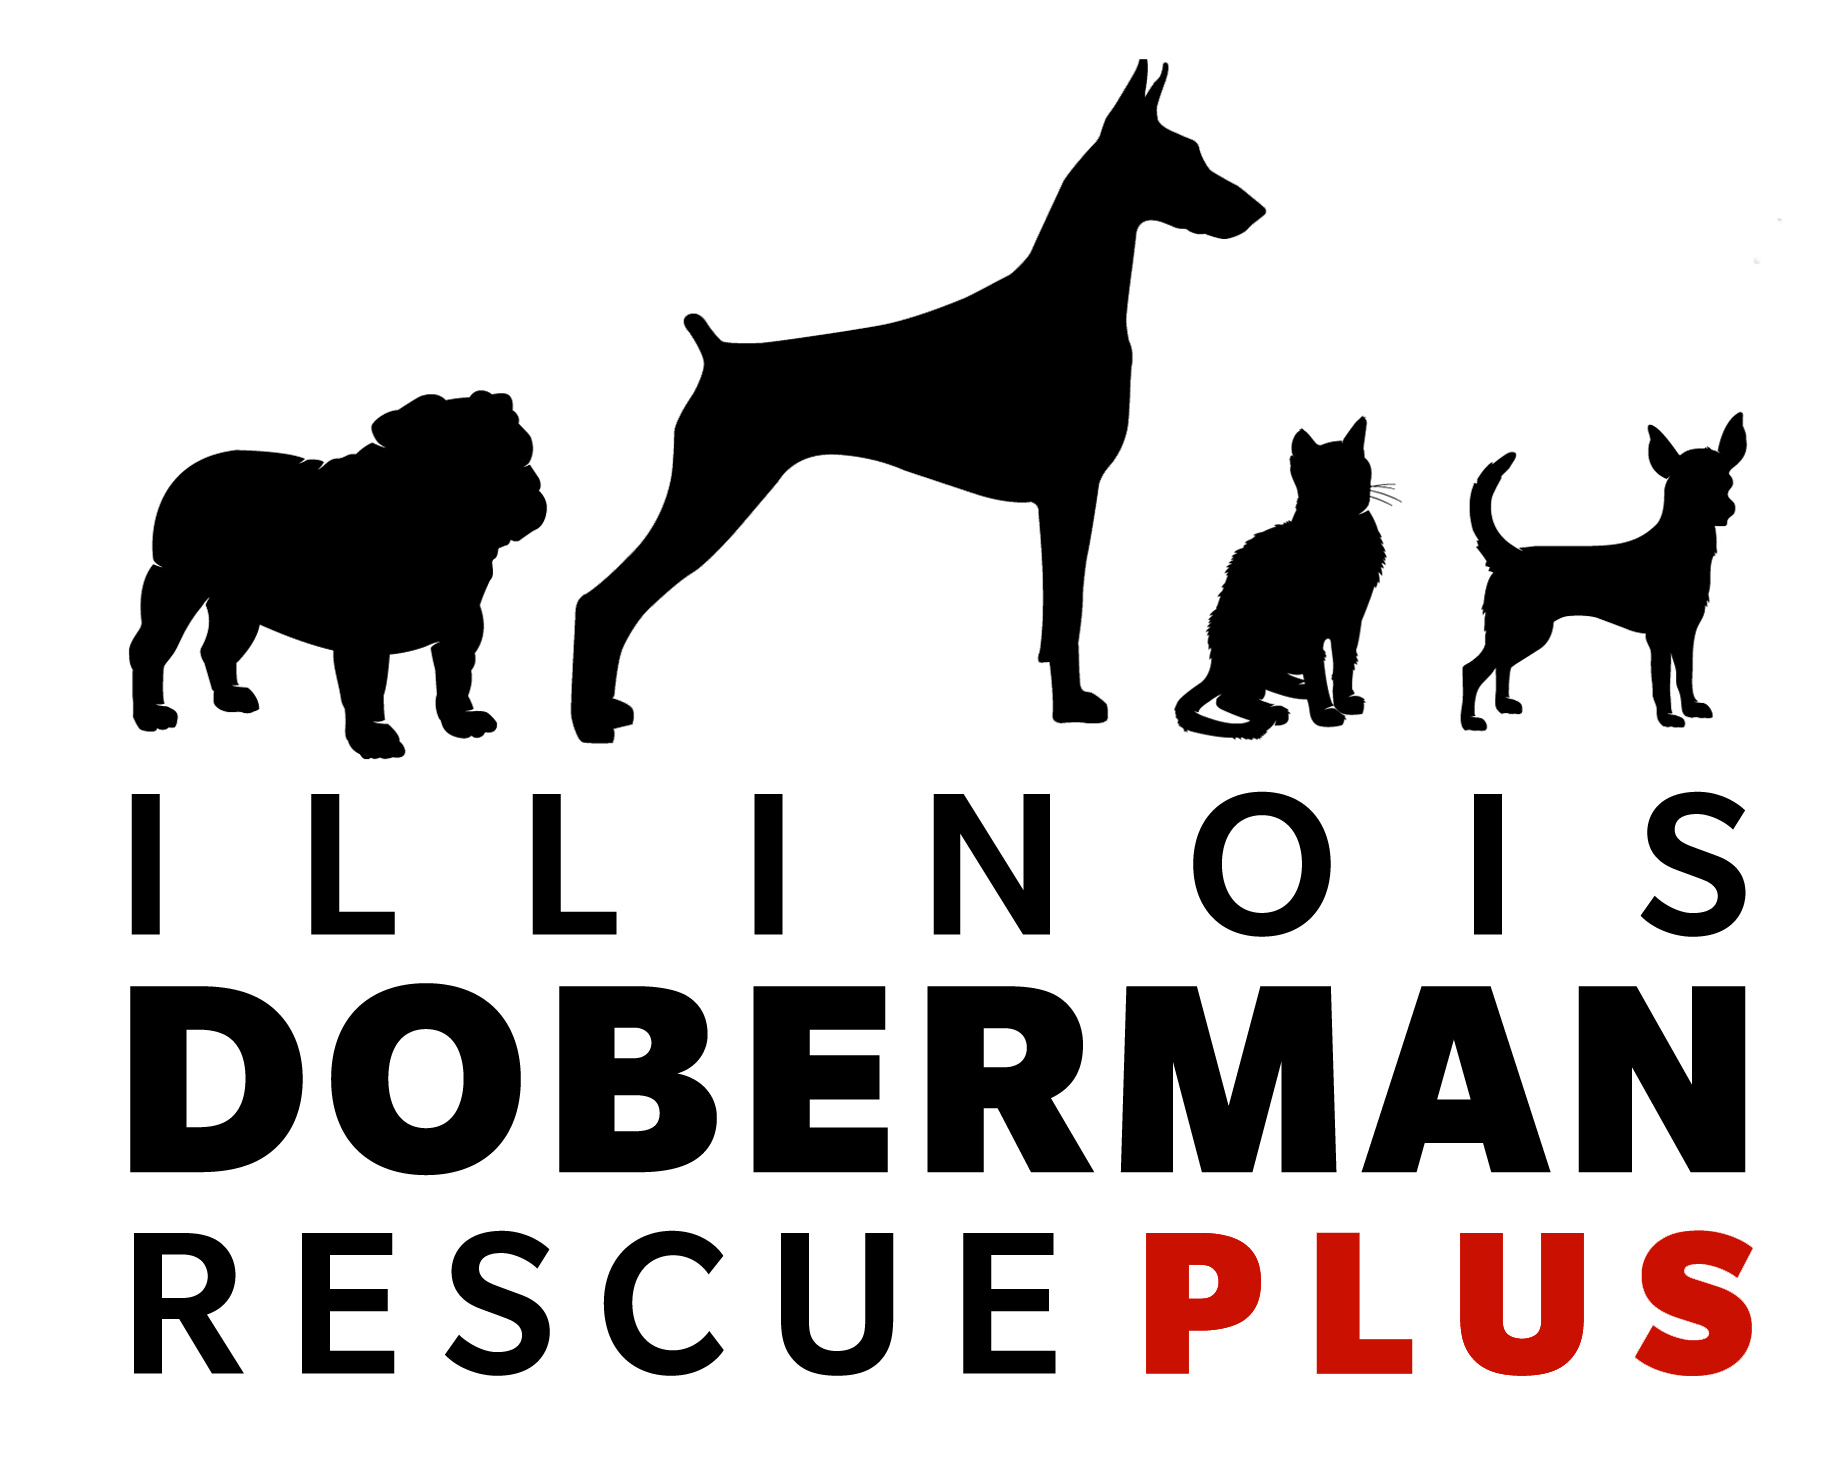 Without your help, we could not save all the Dobermans, Plus dogs, cats tha...